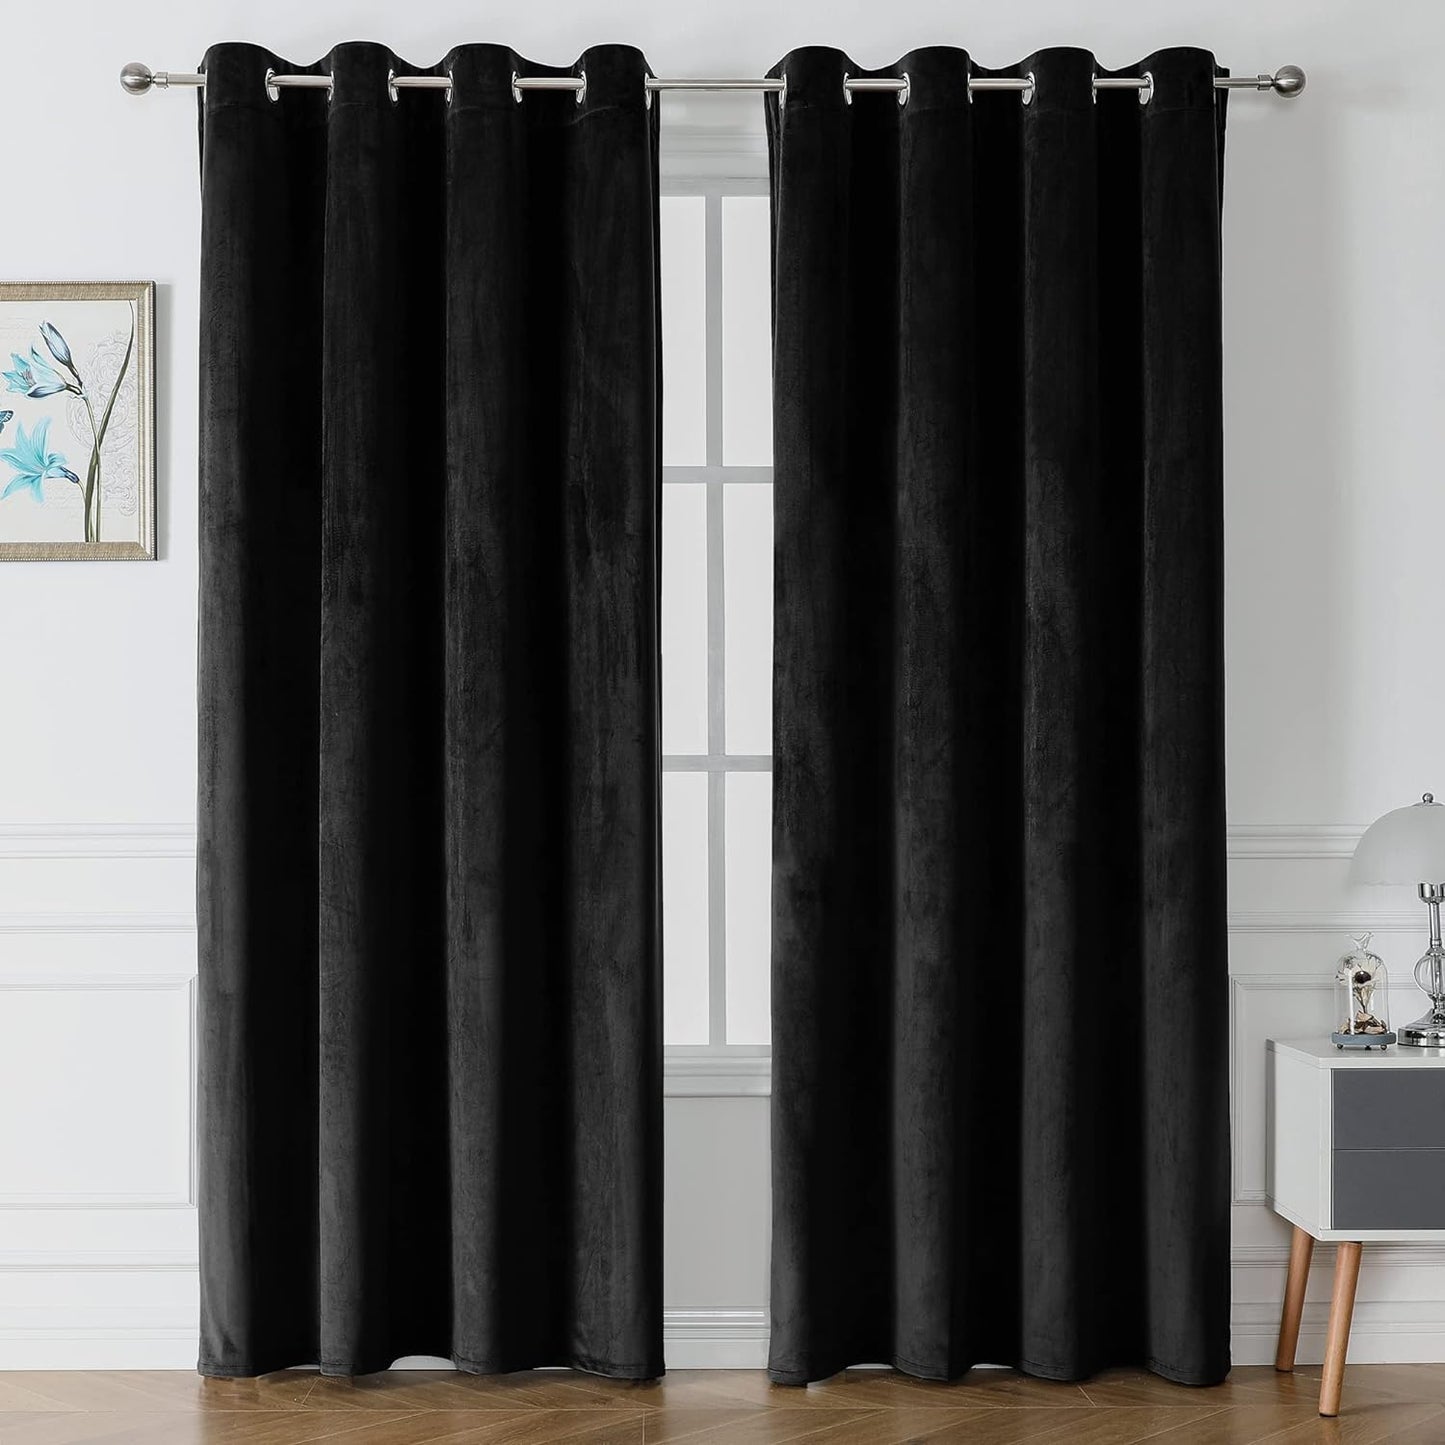 Victree Velvet Curtains for Bedroom, Blackout Curtains 52 X 84 Inch Length - Room Darkening Sun Light Blocking Grommet Window Drapes for Living Room, 2 Panels, Navy  Victree Black 52 X 96 Inches 